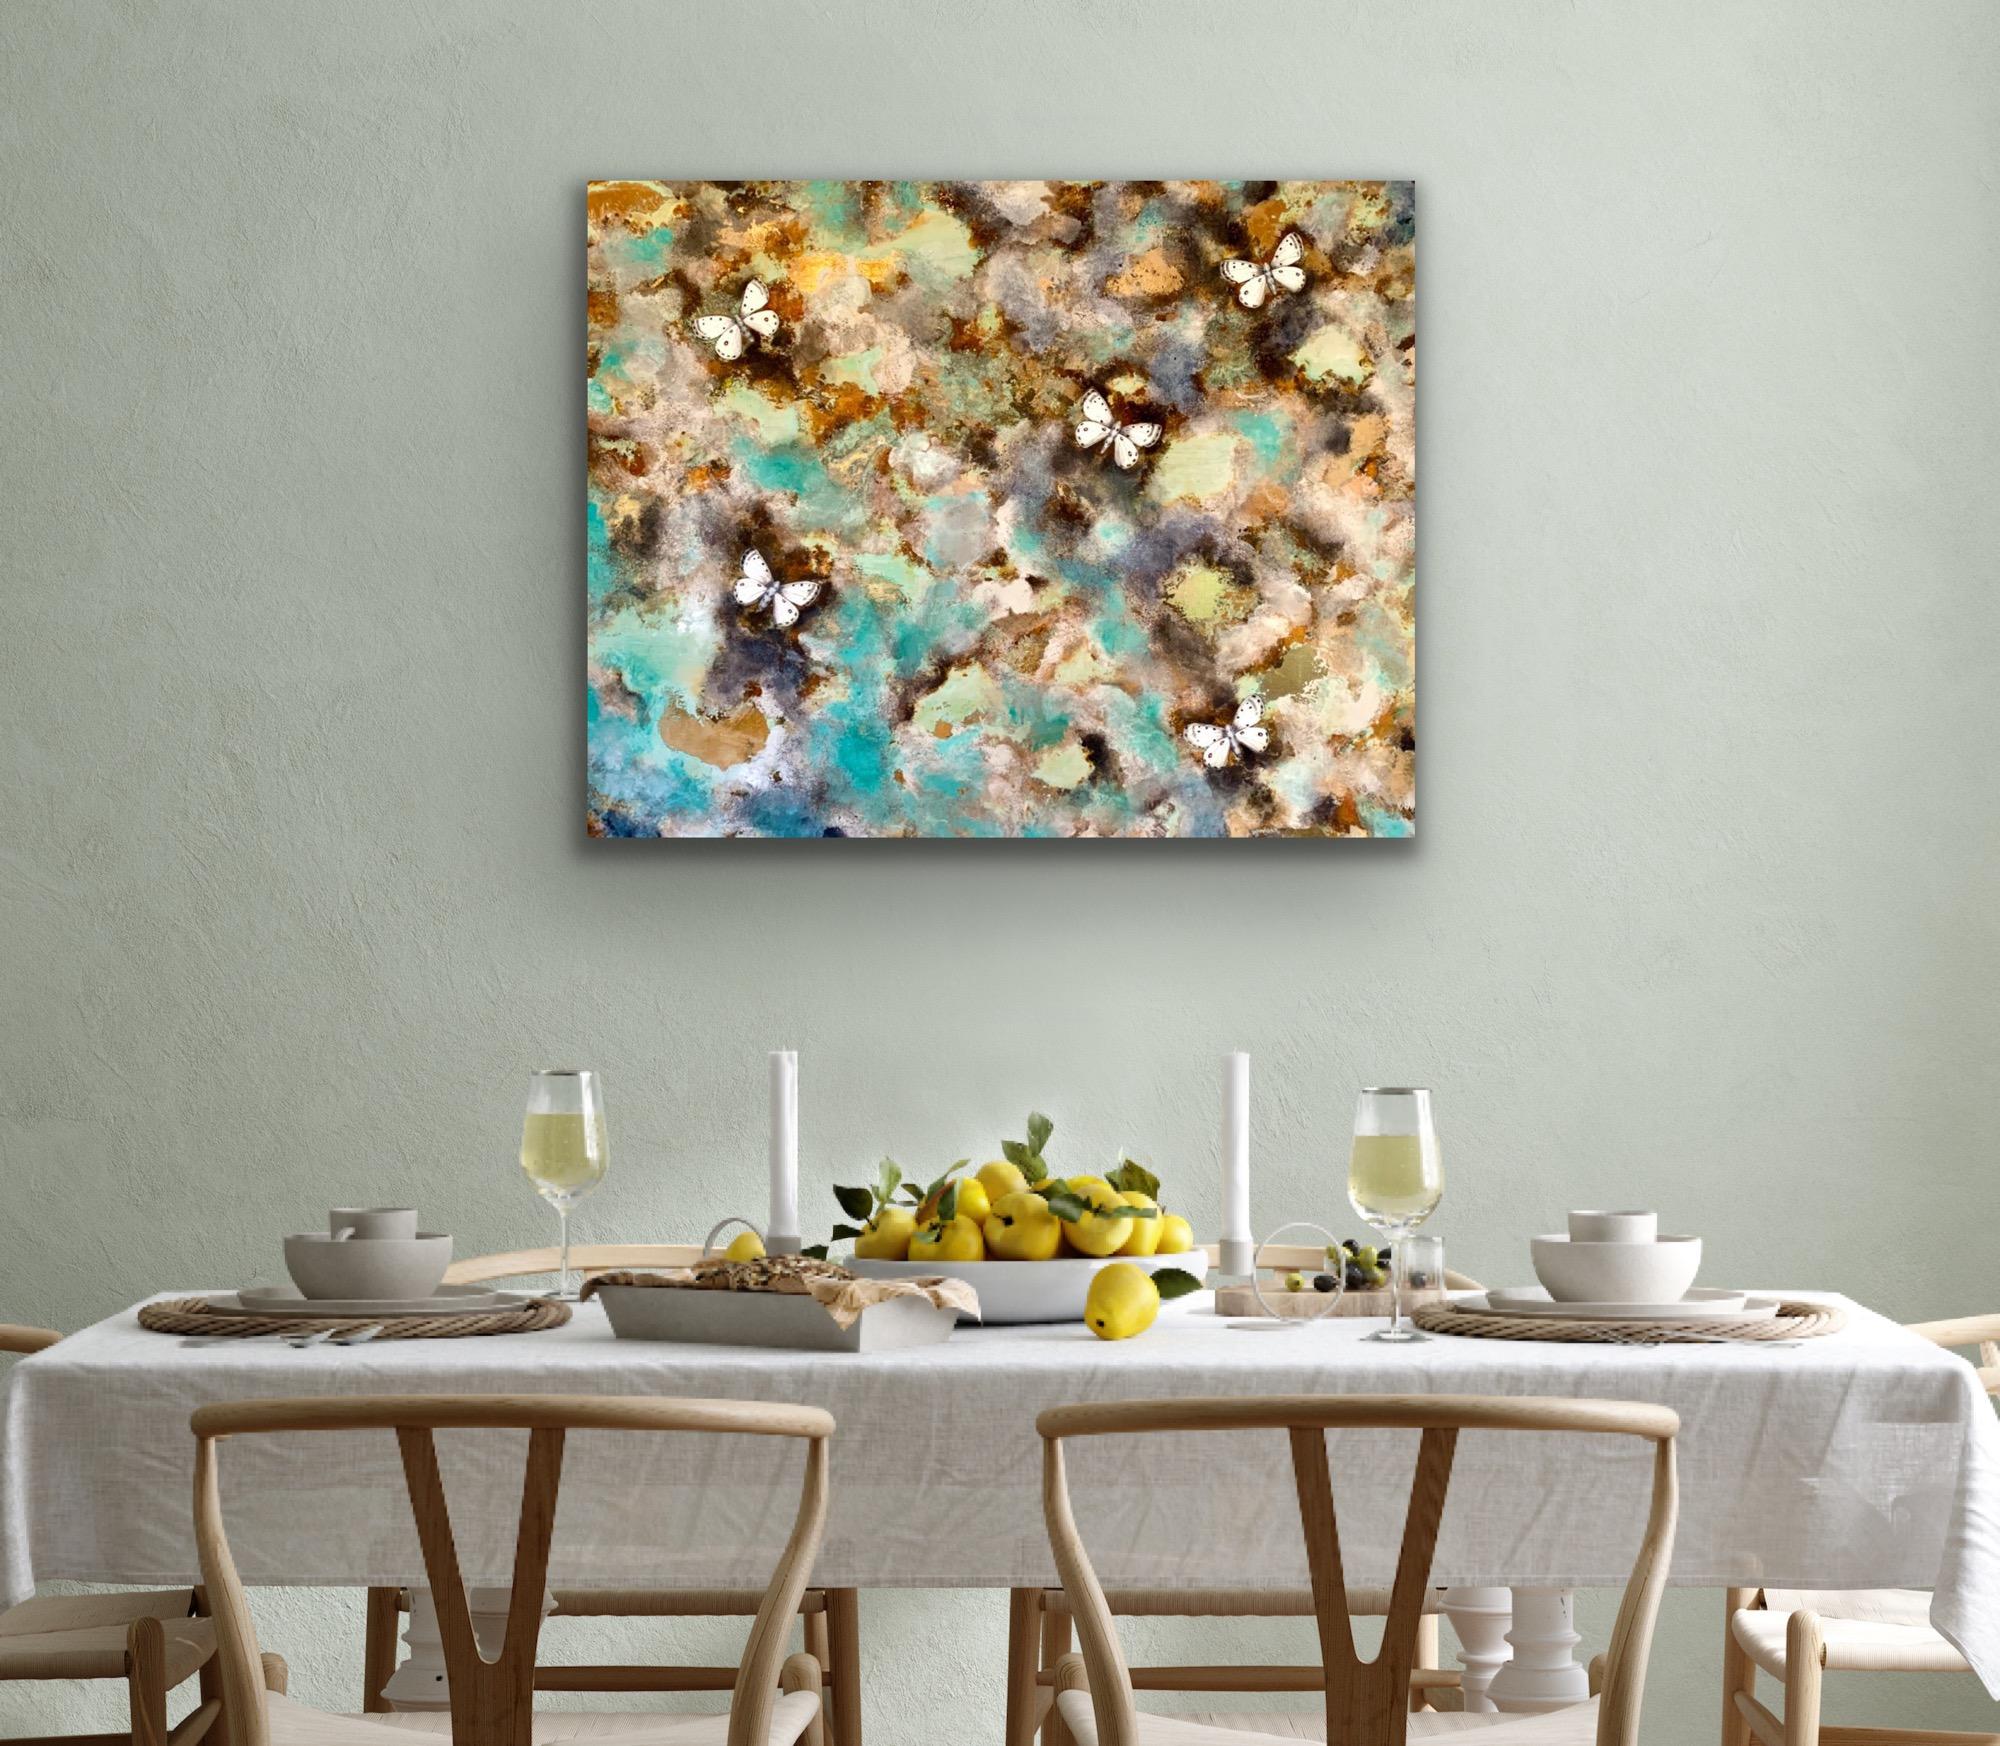 This painting is very much about our ever changing environment. With colours reflecting minerals from aerial photographs of landscapes and butterflies reflecting hope in the rejuvenation of our future.

Kate really loves the illuminating light that